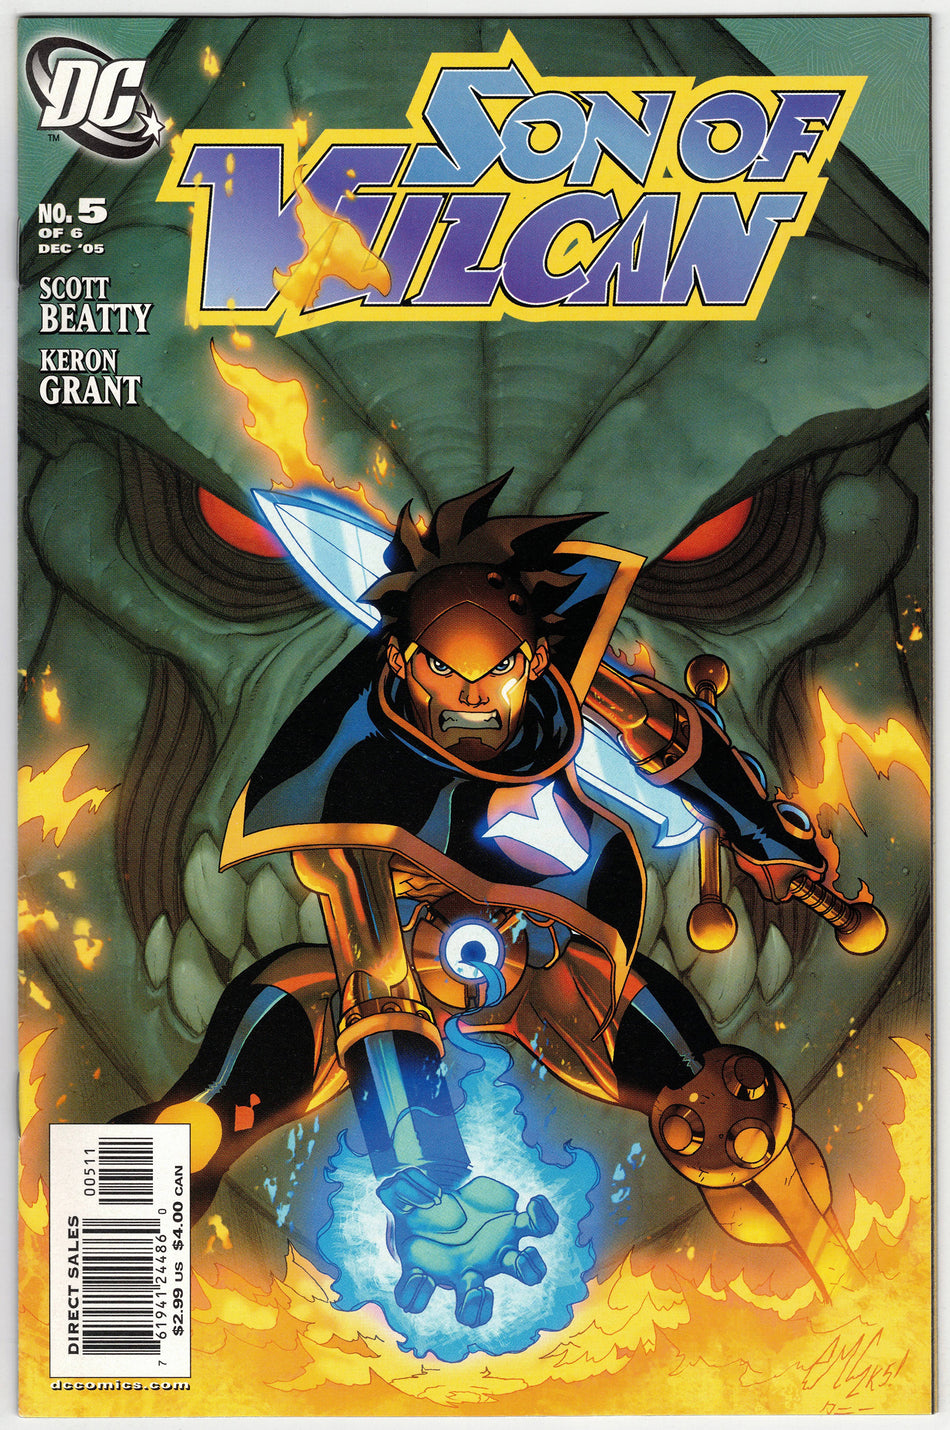 Photo of Son of Vulcan, Vol. 2 (2005) Issue 5 Comic sold by Stronghold Collectibles